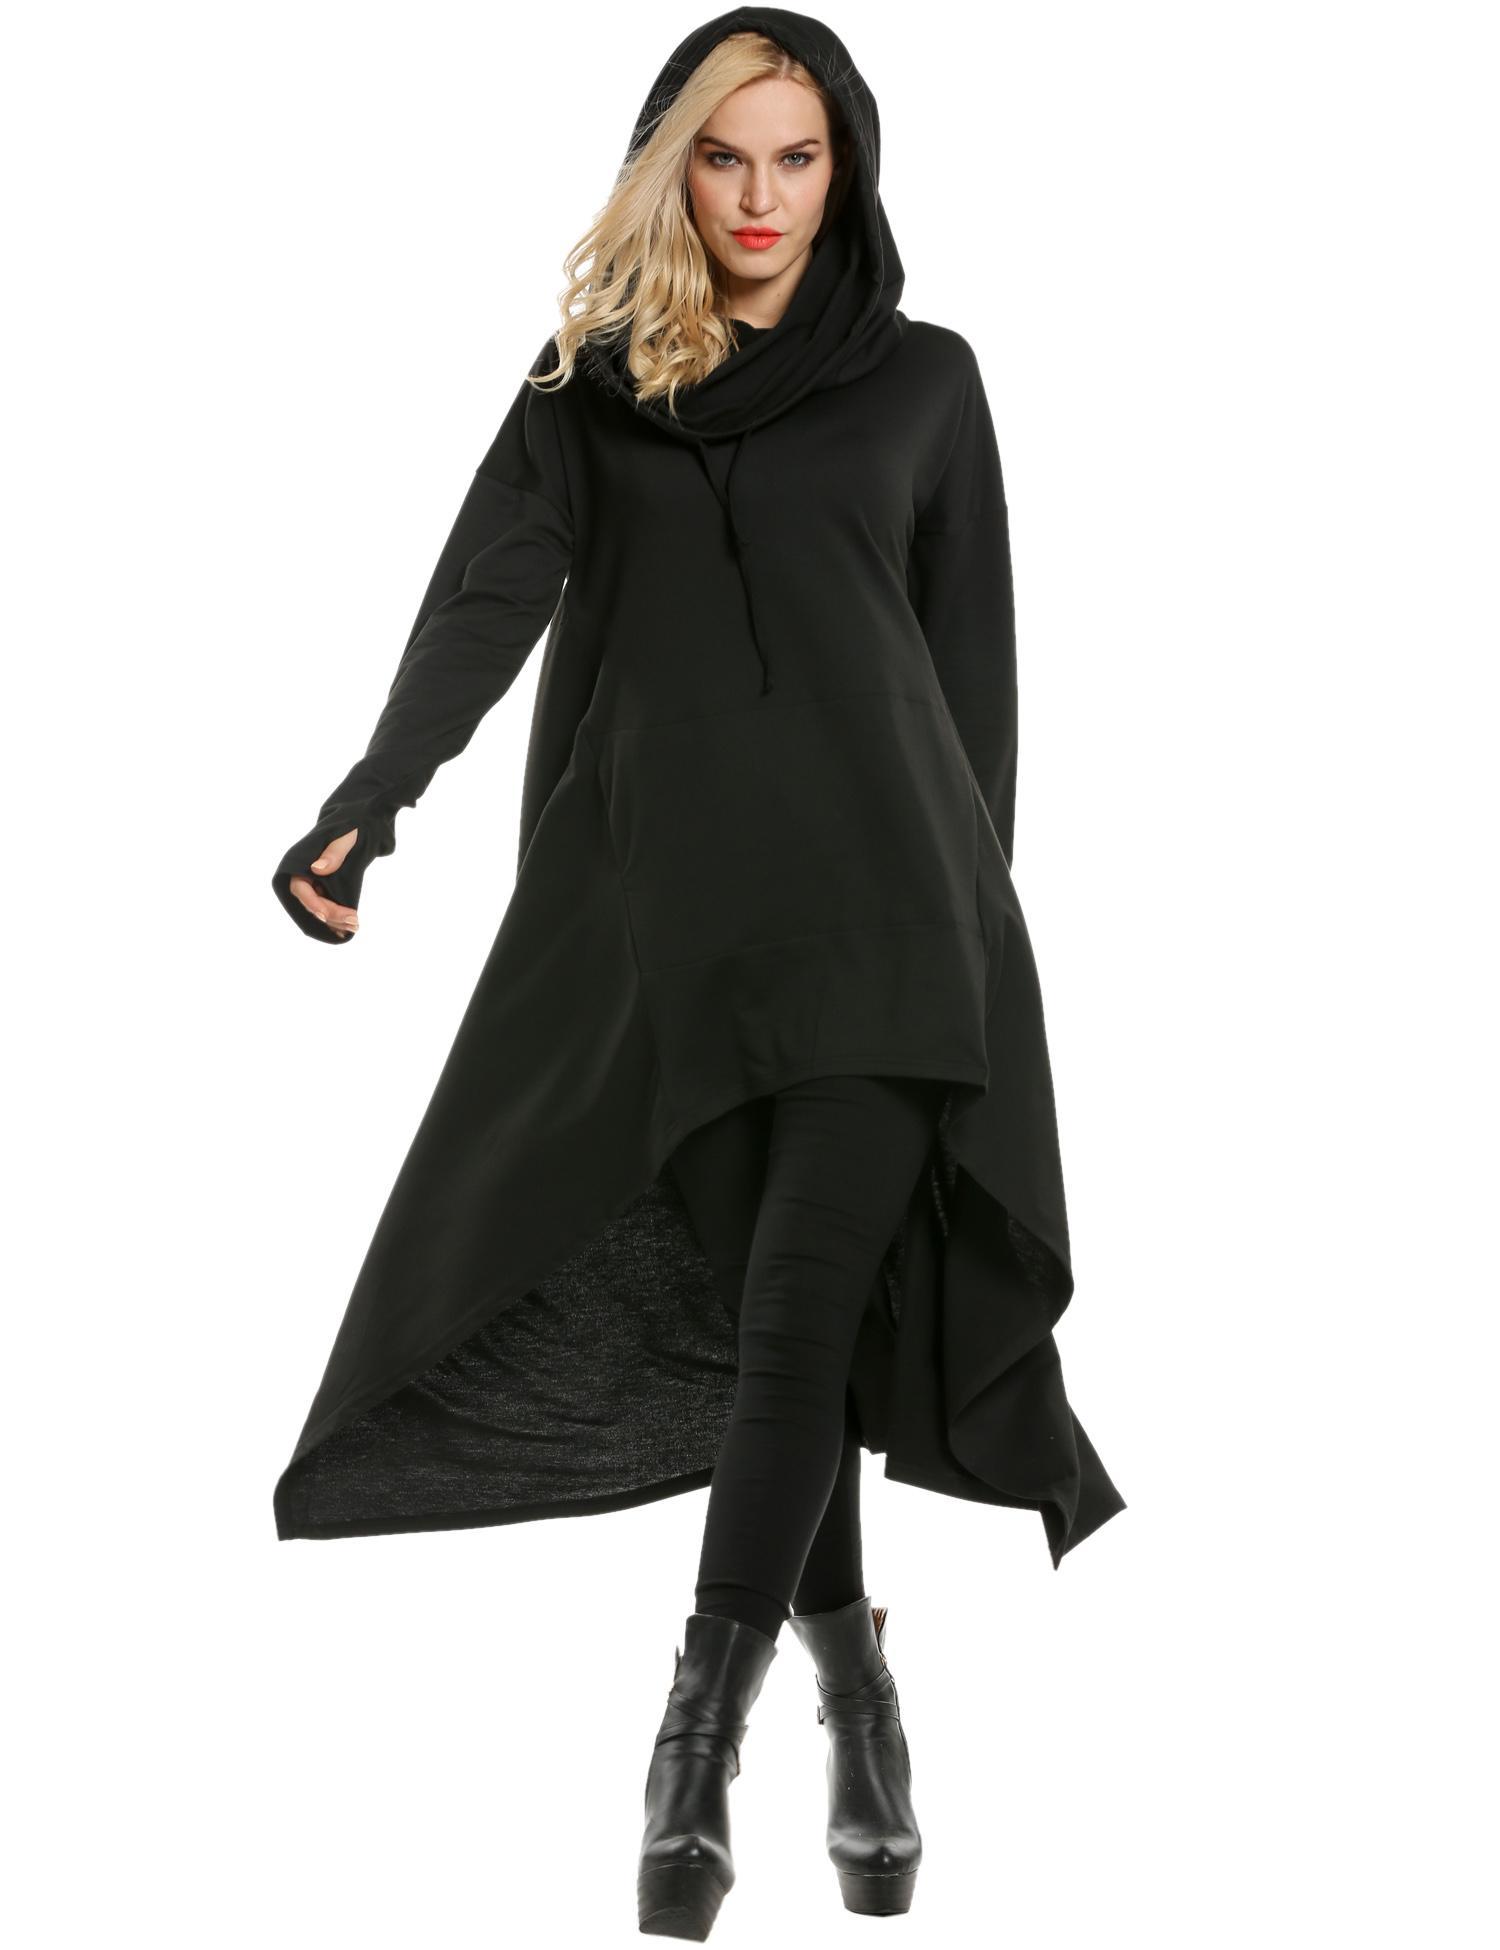 Where to get a black hooded coat like the one Taylor Swift is wearing ...